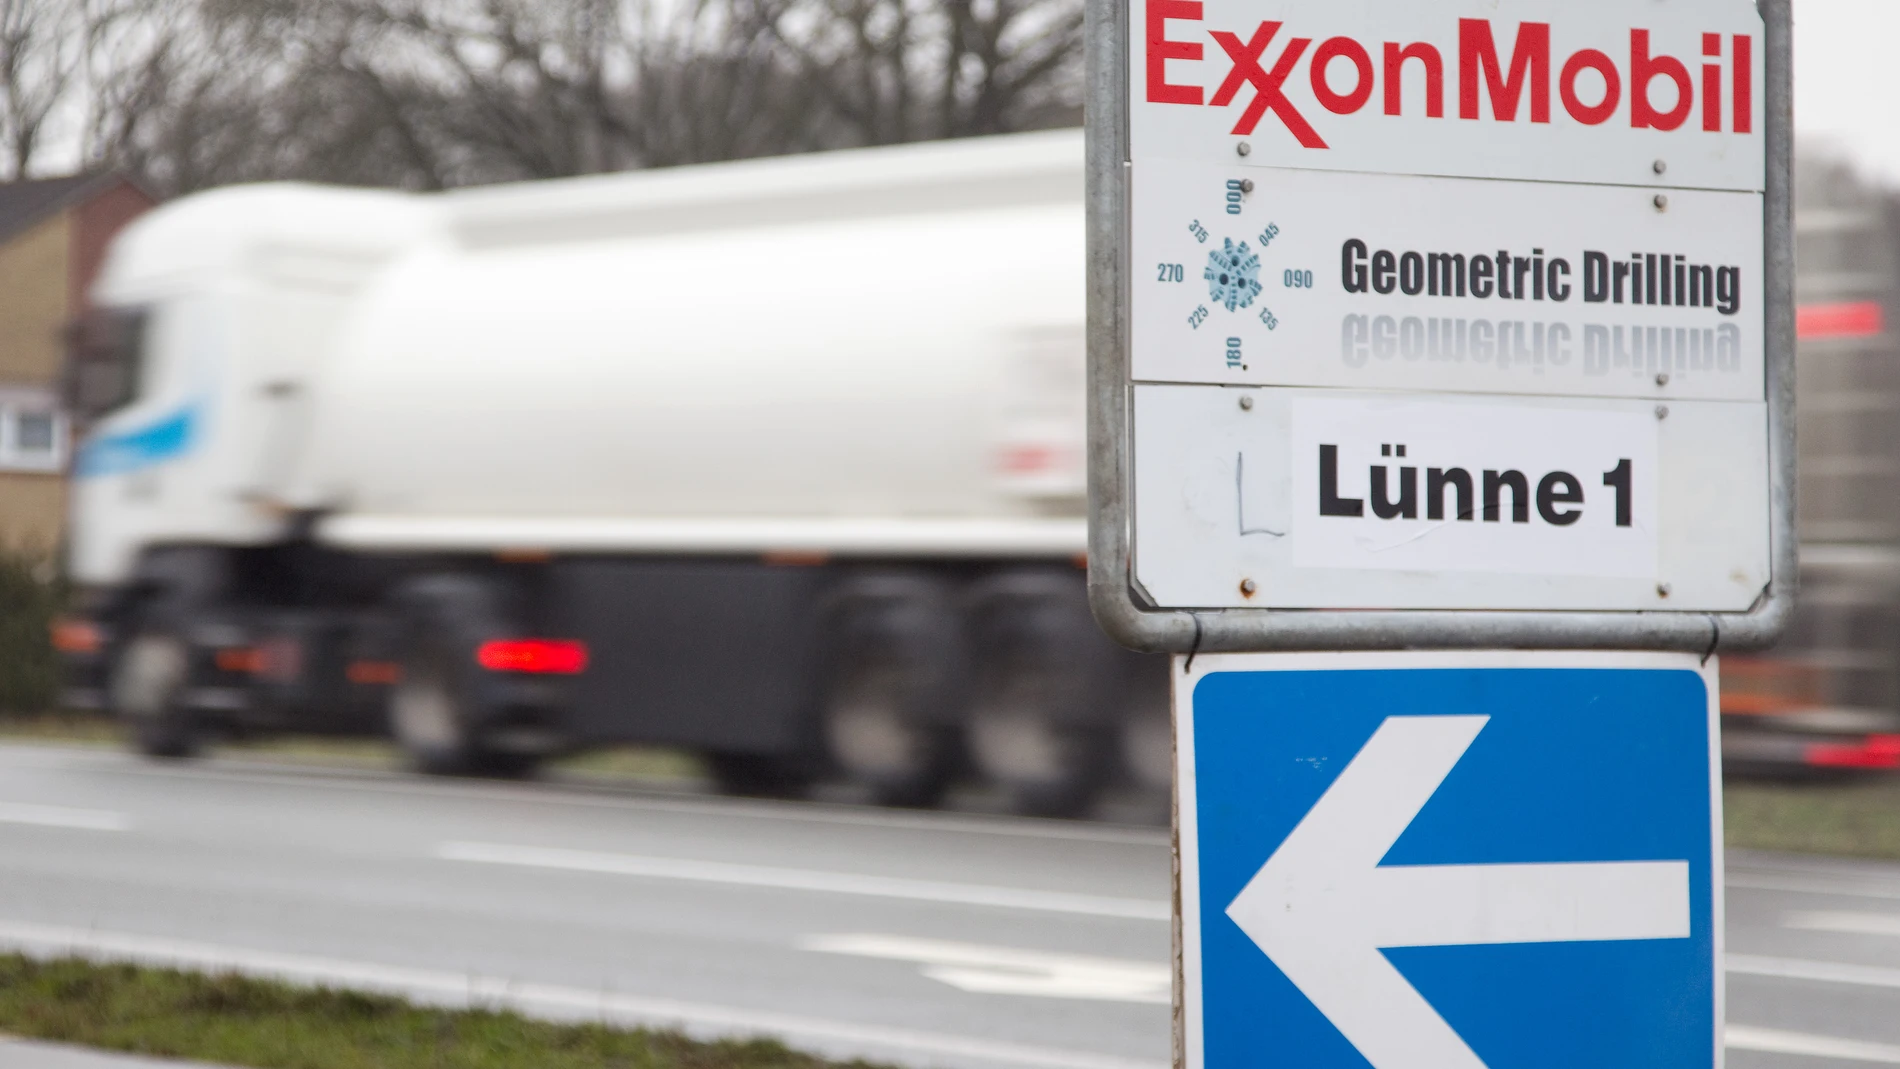 FILED - 14 January 2011, Luenne: A general view of a sign reading "Exxon Mobil Geometric Drilling Luenne 1". US oil and gas company Exxon Mobil has entered into a definitive agreement to acquire US energy company Denbury in an all-stock deal valued at $4.9 billion, or $89.45 per share. Photo: picture alliance / dpa (Foto de ARCHIVO) 14/01/2011 ONLY FOR USE IN SPAIN